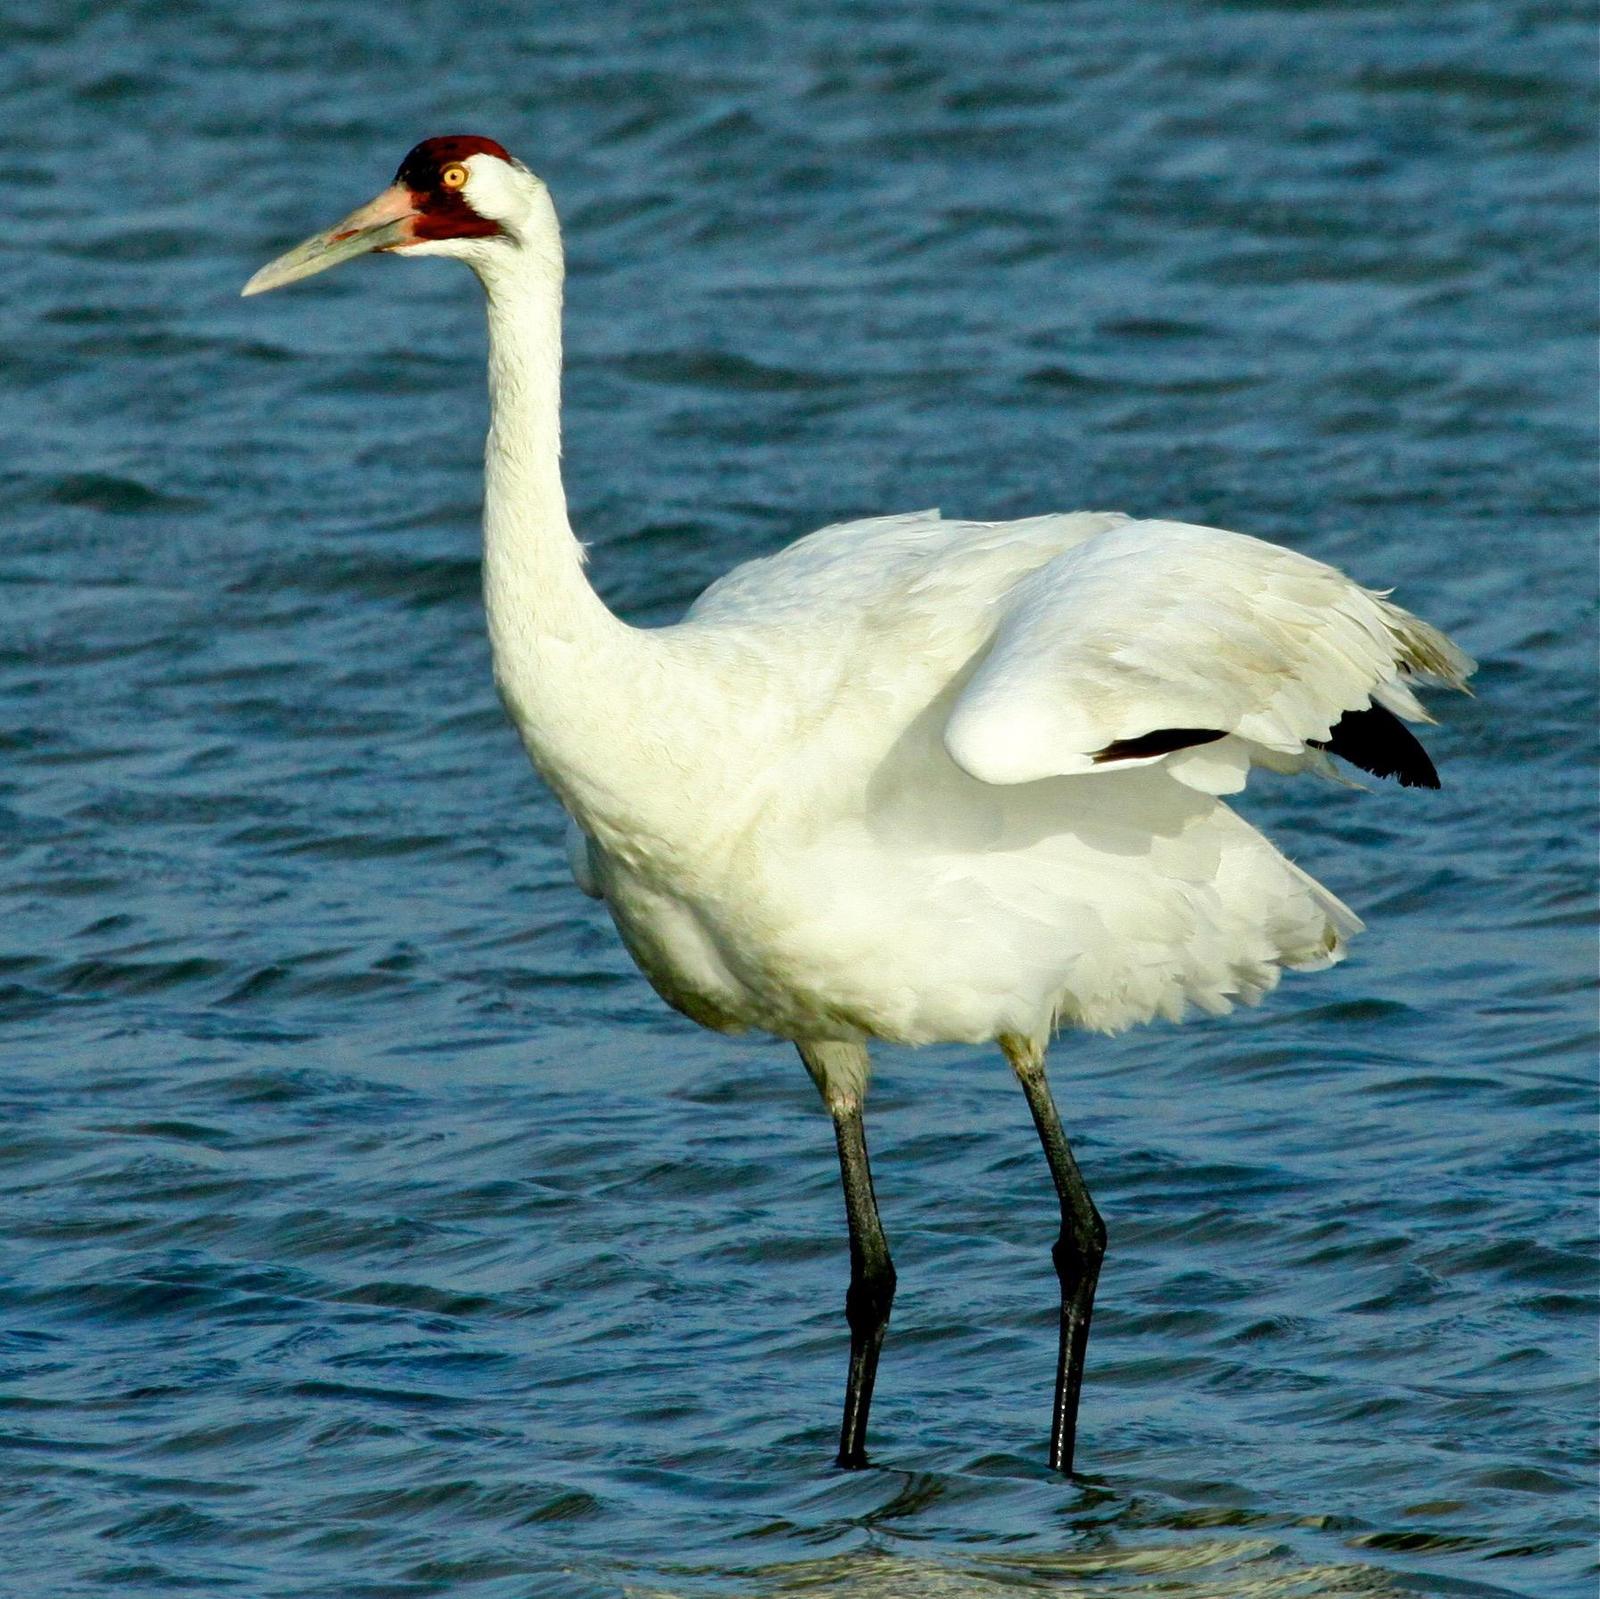 Whooping Crane Photo by Rob O'Donnell